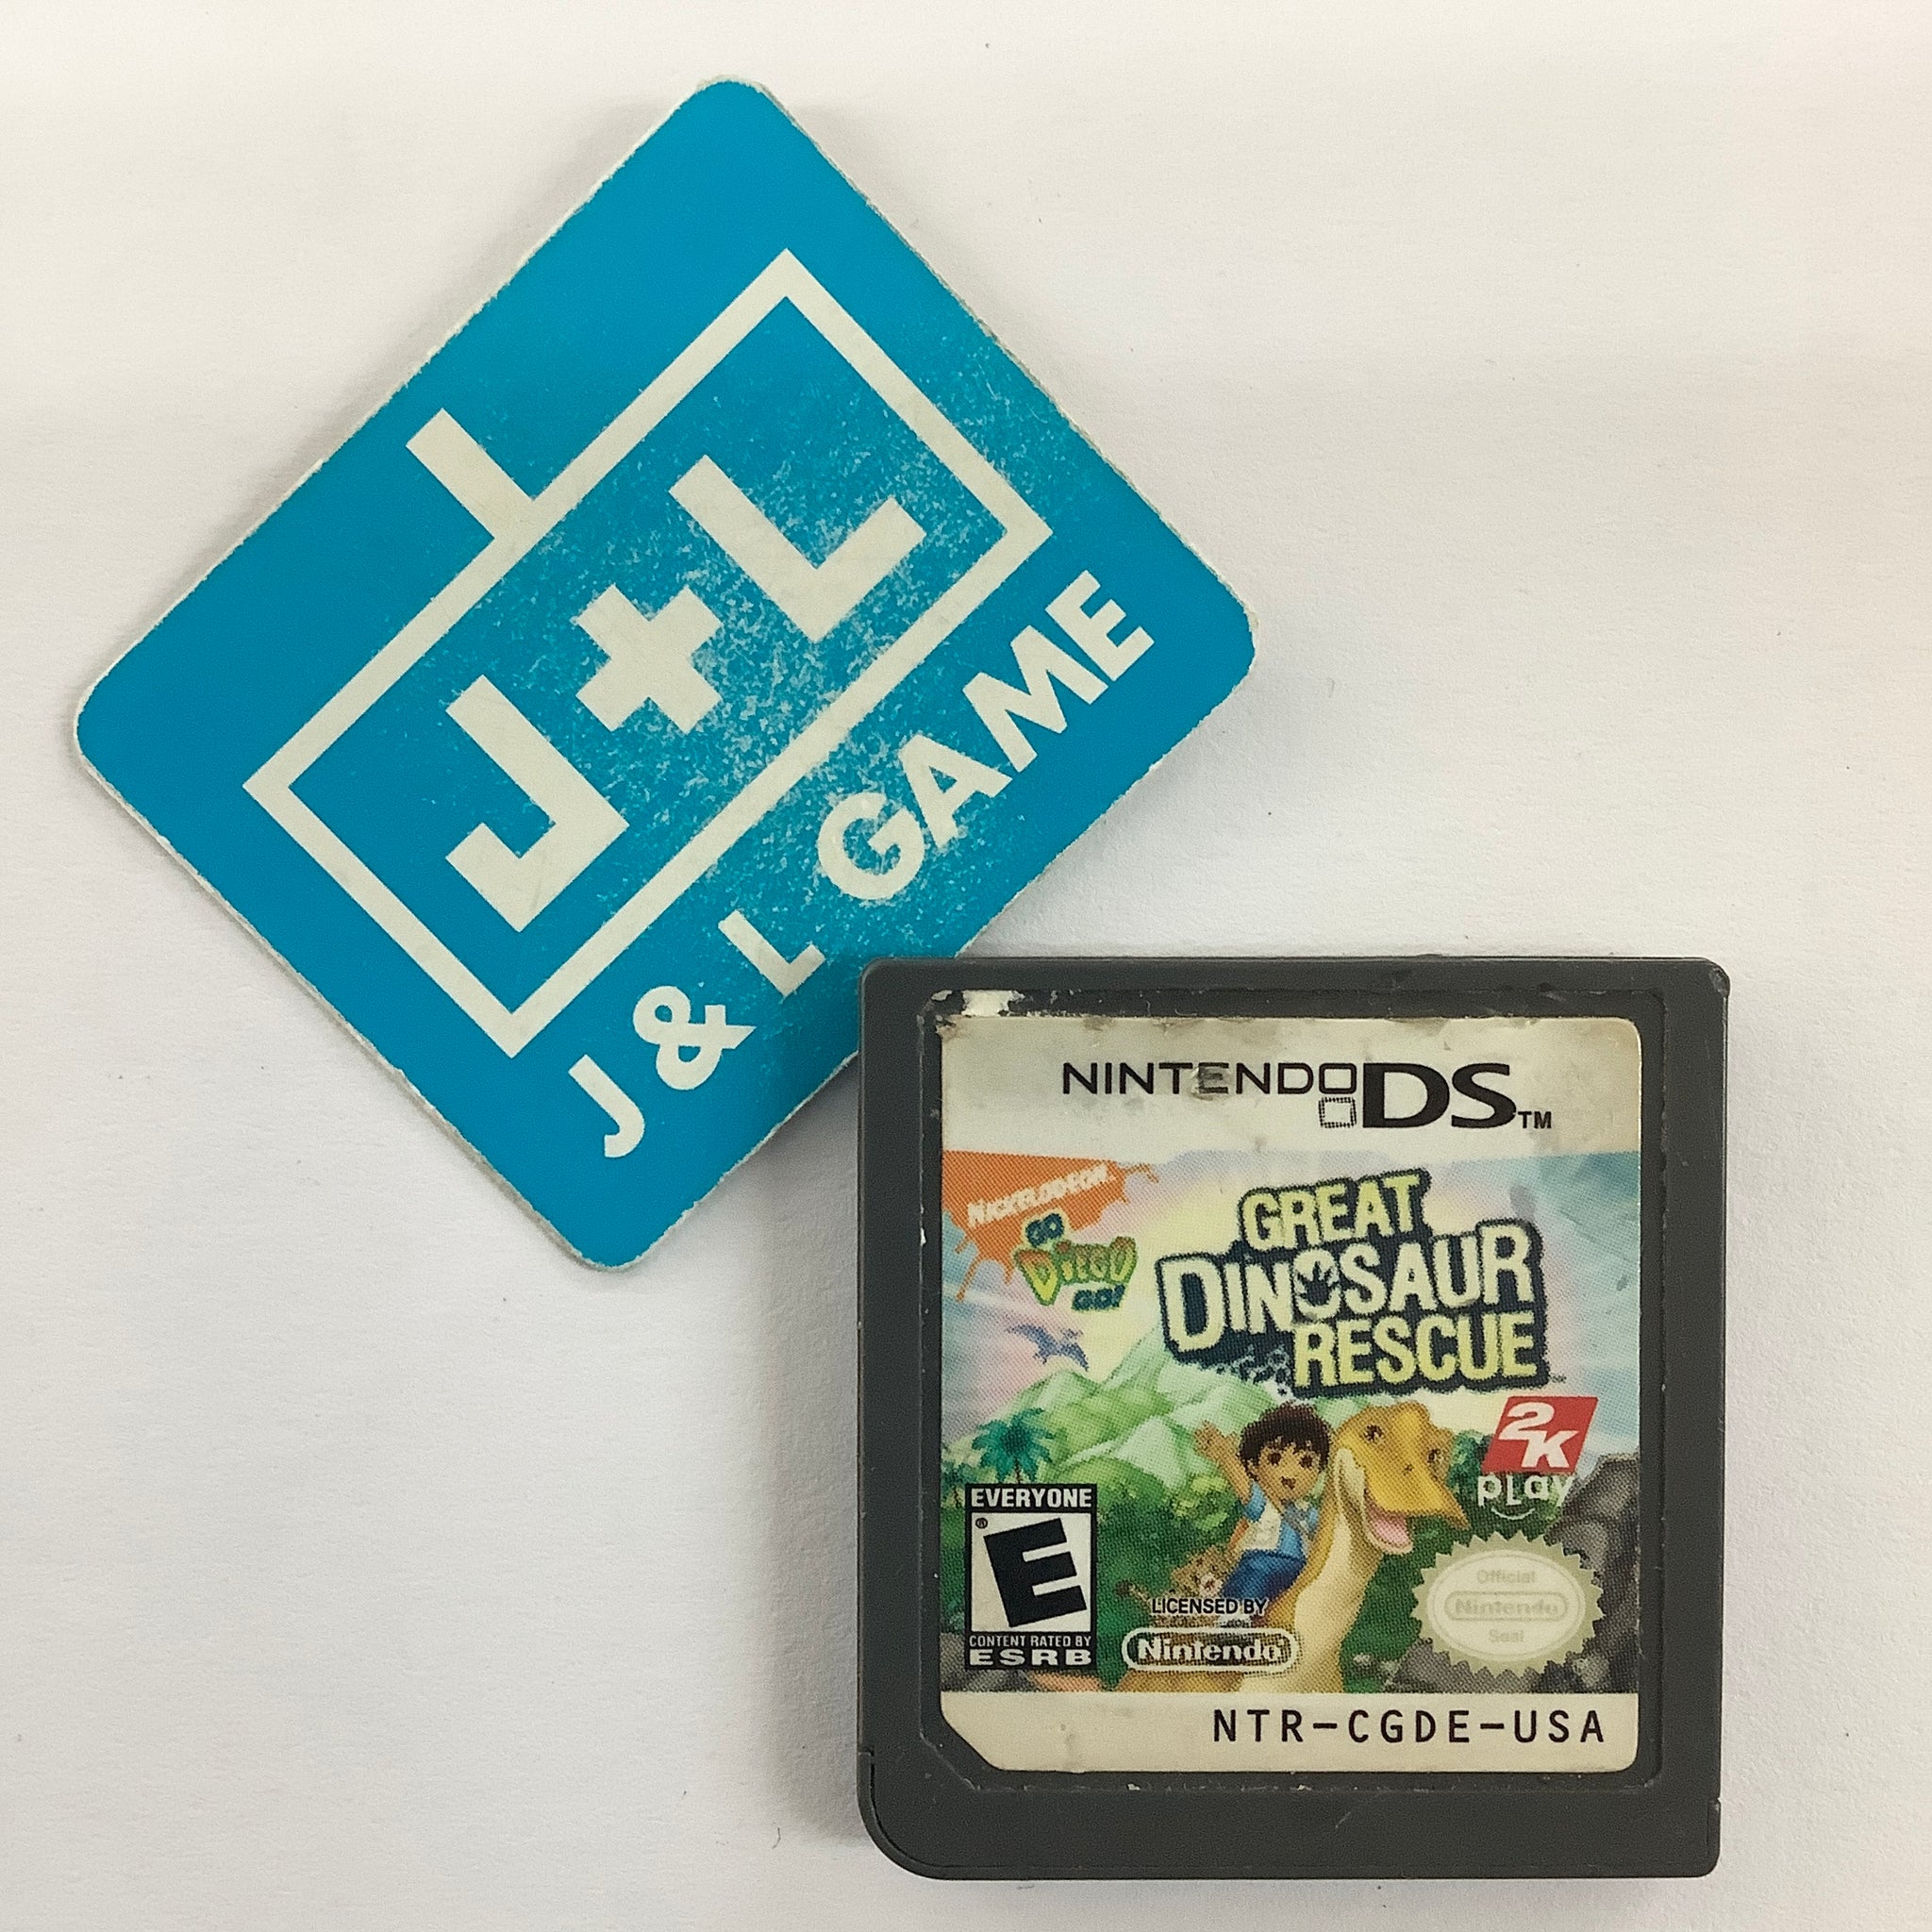 Go, Diego, Go!: Great Dinosaur Rescue - (NDS) Nintendo DS [Pre-Owned] Video Games Take-Two Interactive   